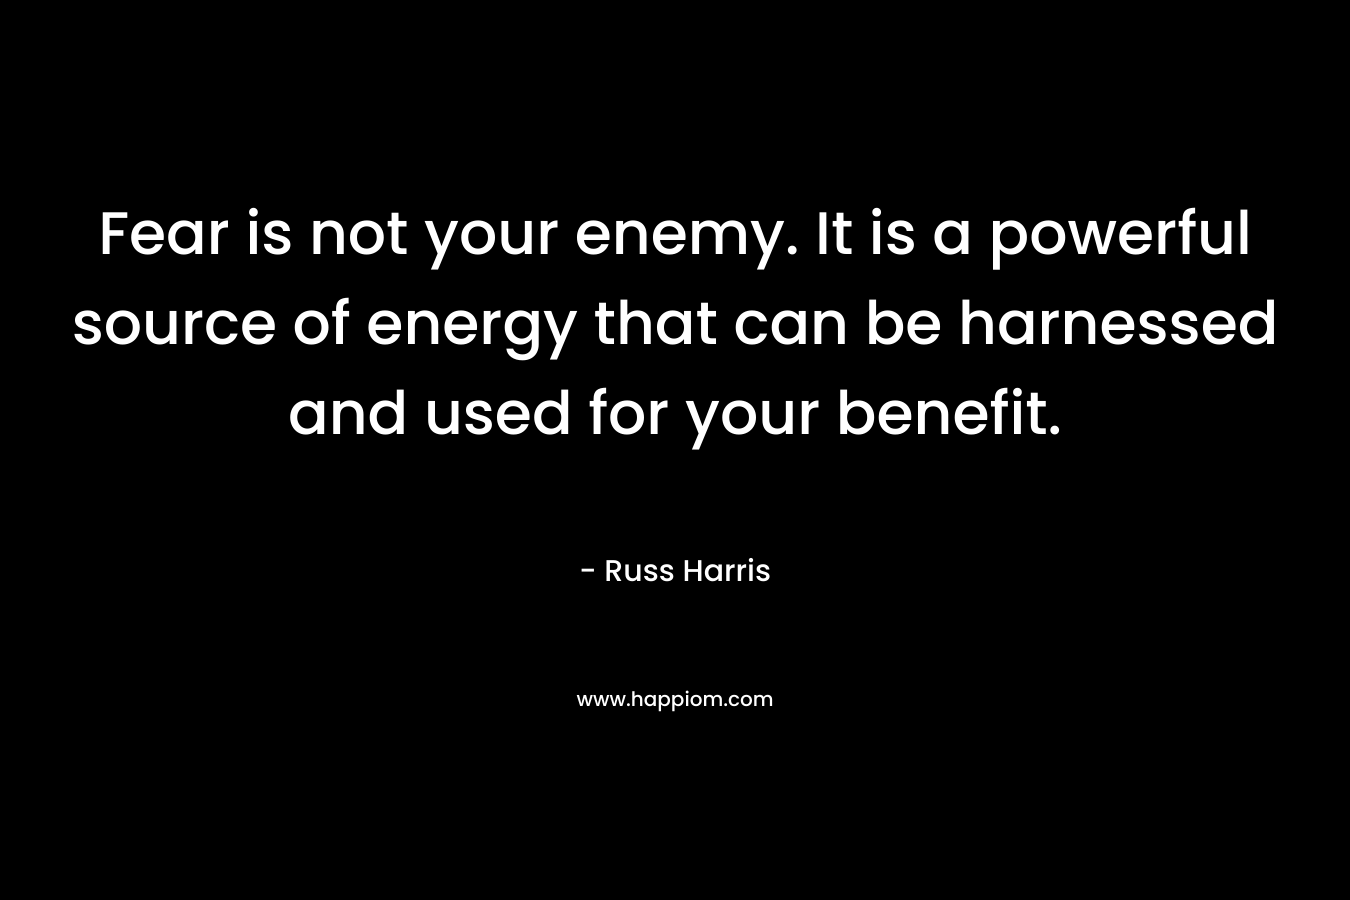 Fear is not your enemy. It is a powerful source of energy that can be harnessed and used for your benefit. – Russ Harris